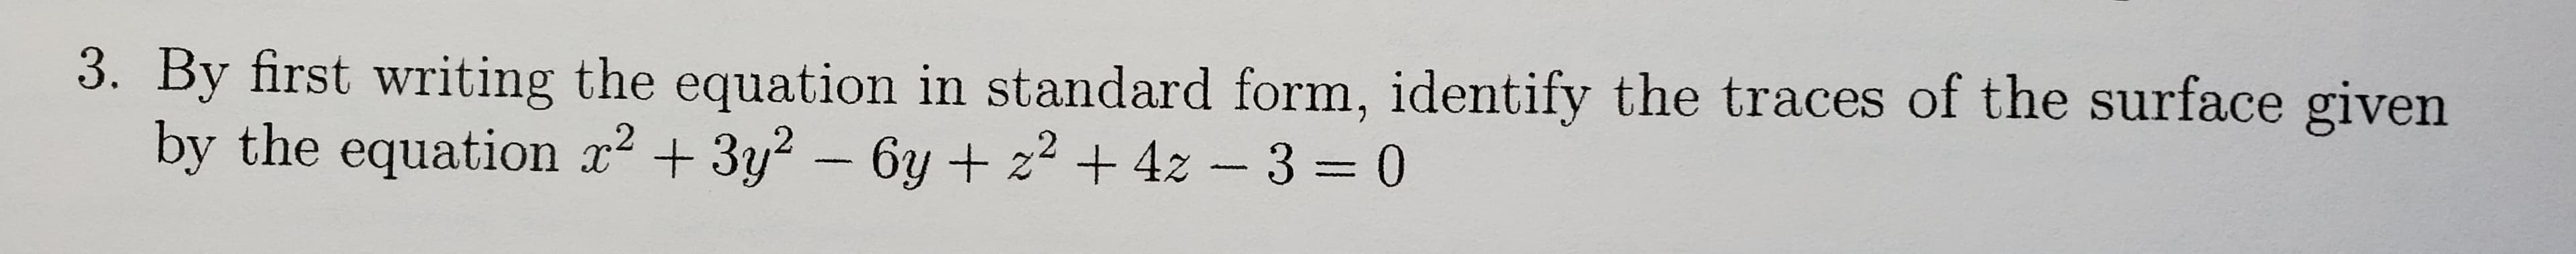 By first writing the equation in standard form, identify the traces of the surface given
by the equation x2 + 3y? - 6y + z2 + 4z - 3 = 0
